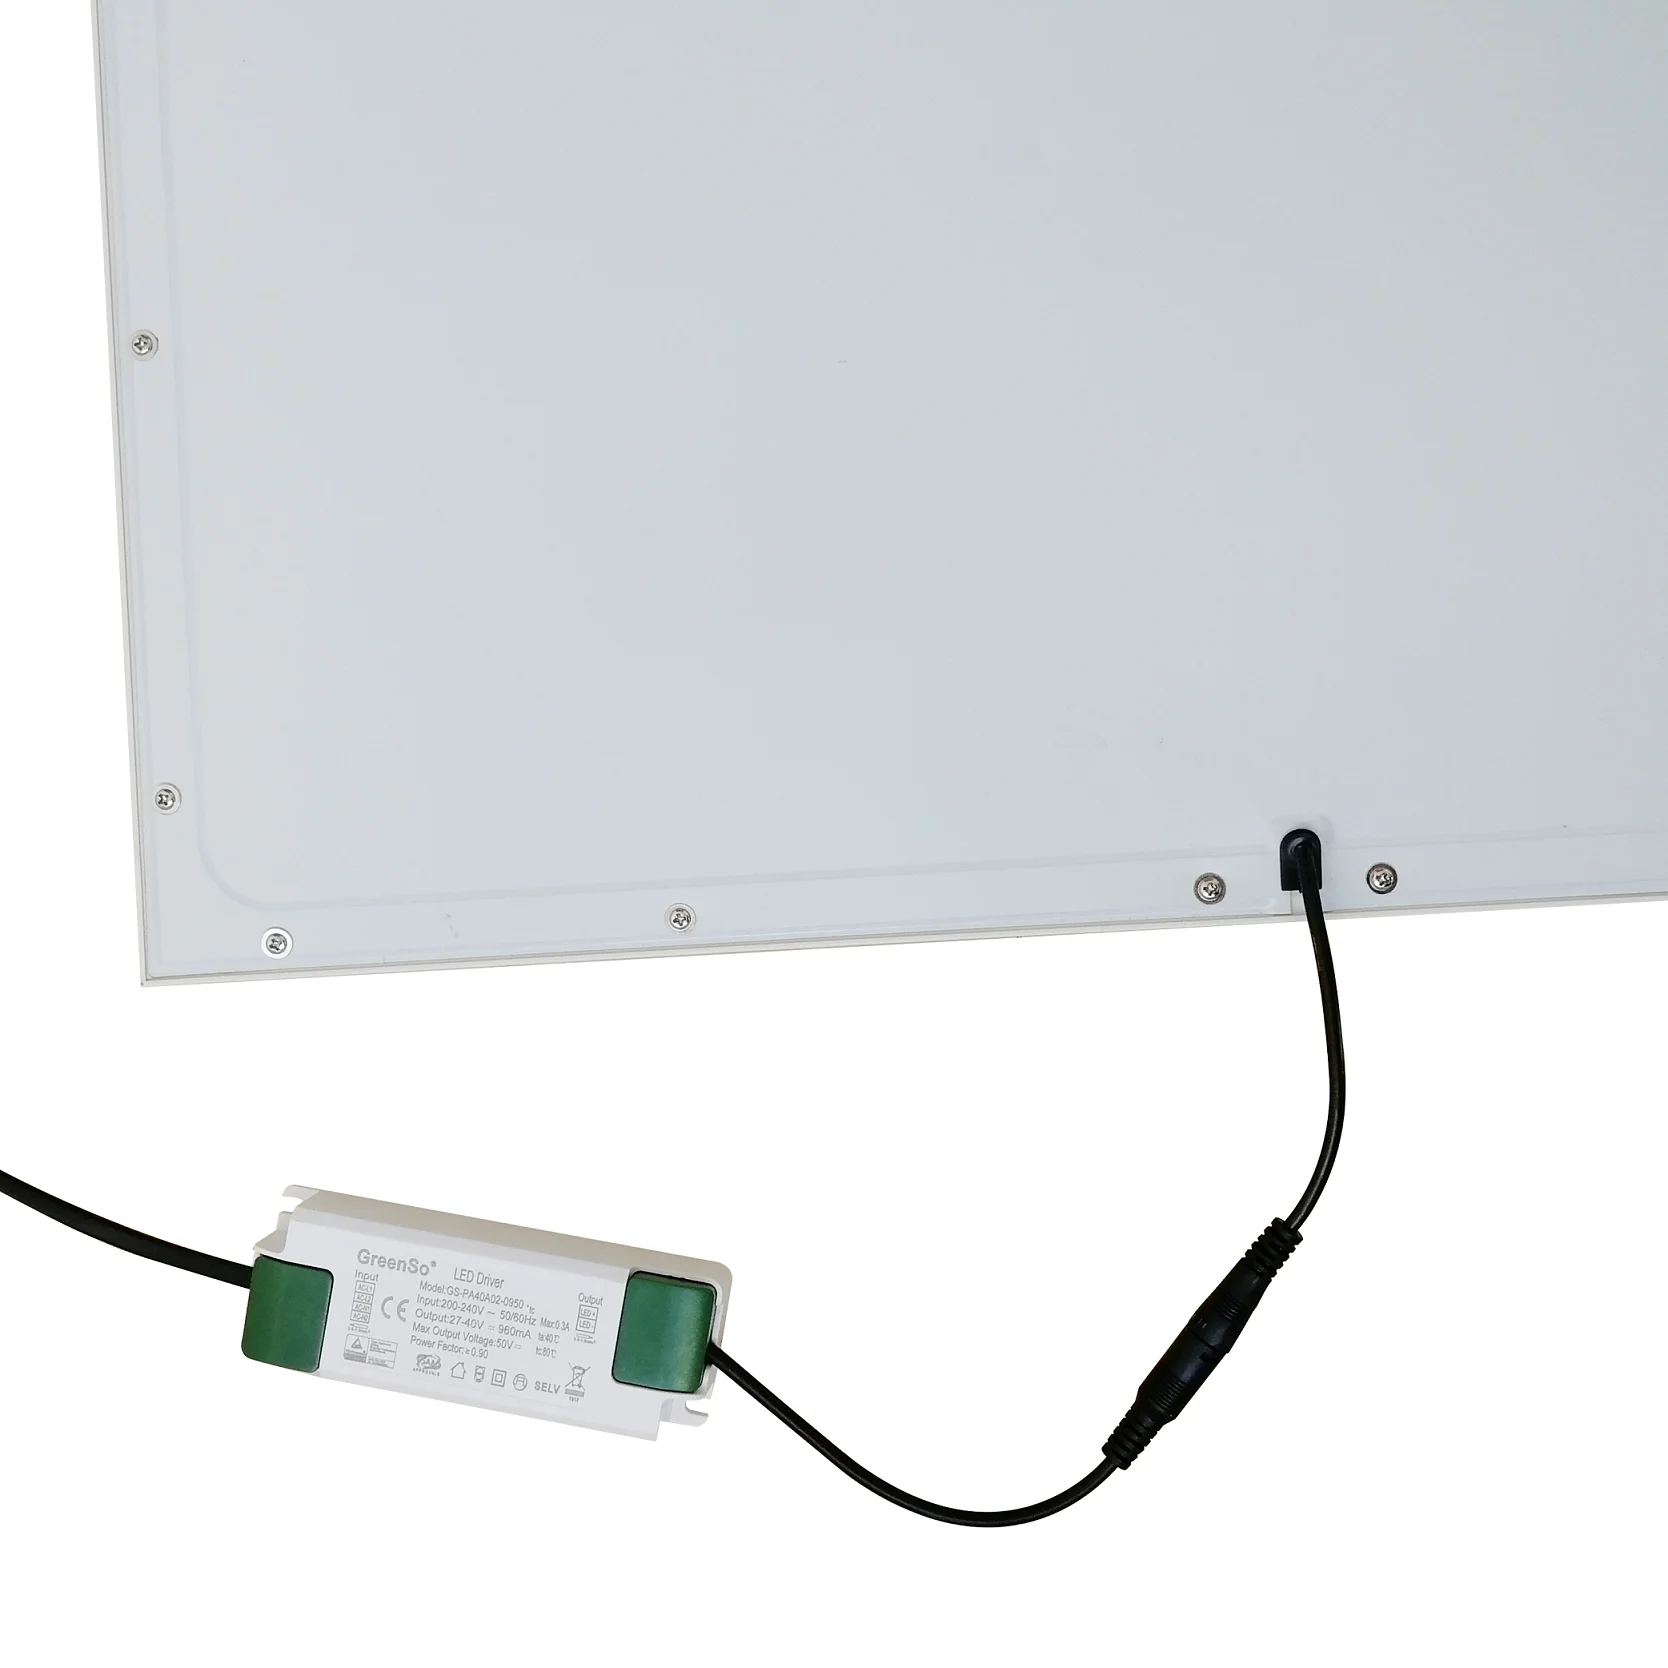 Newest 2in1 Panel light Illumination and Disinfection UVC Panel Light for hospital